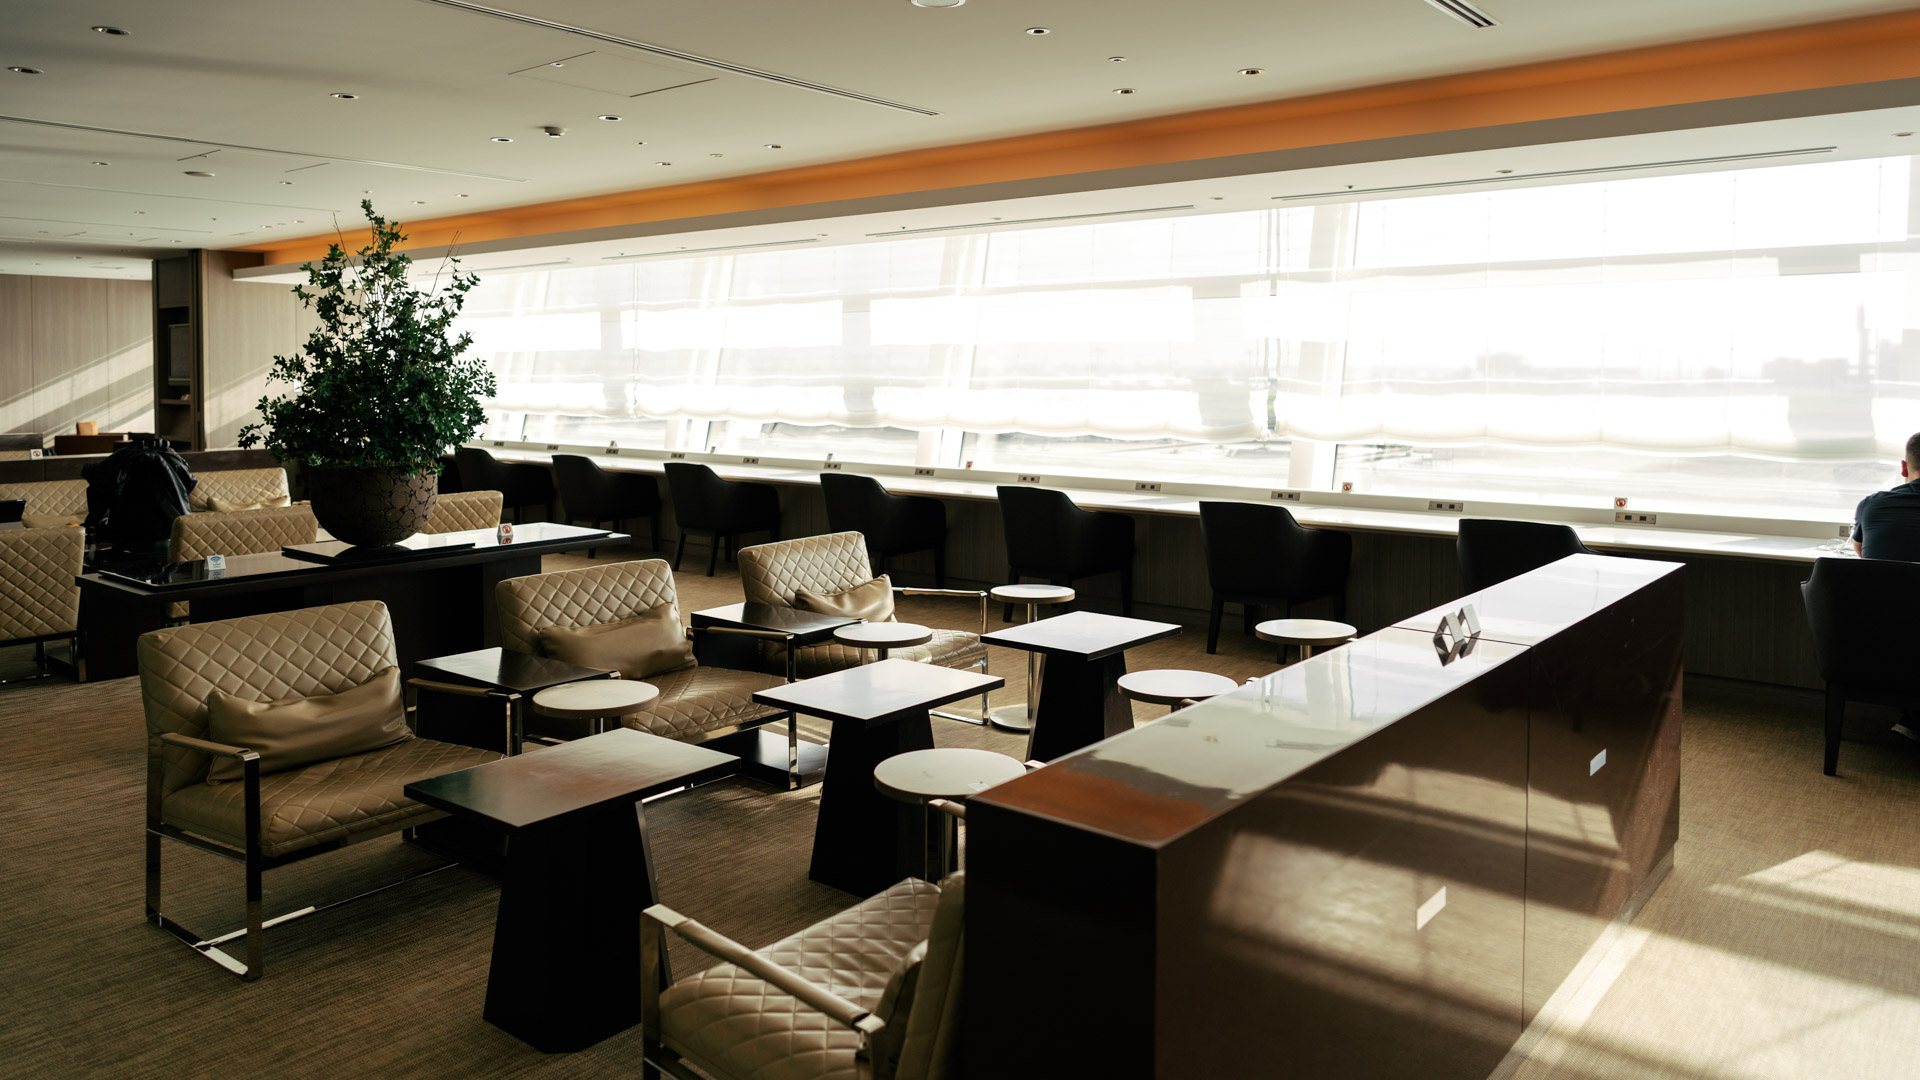 Japan Airlines First Class Lounge Tokyo Haneda relax area